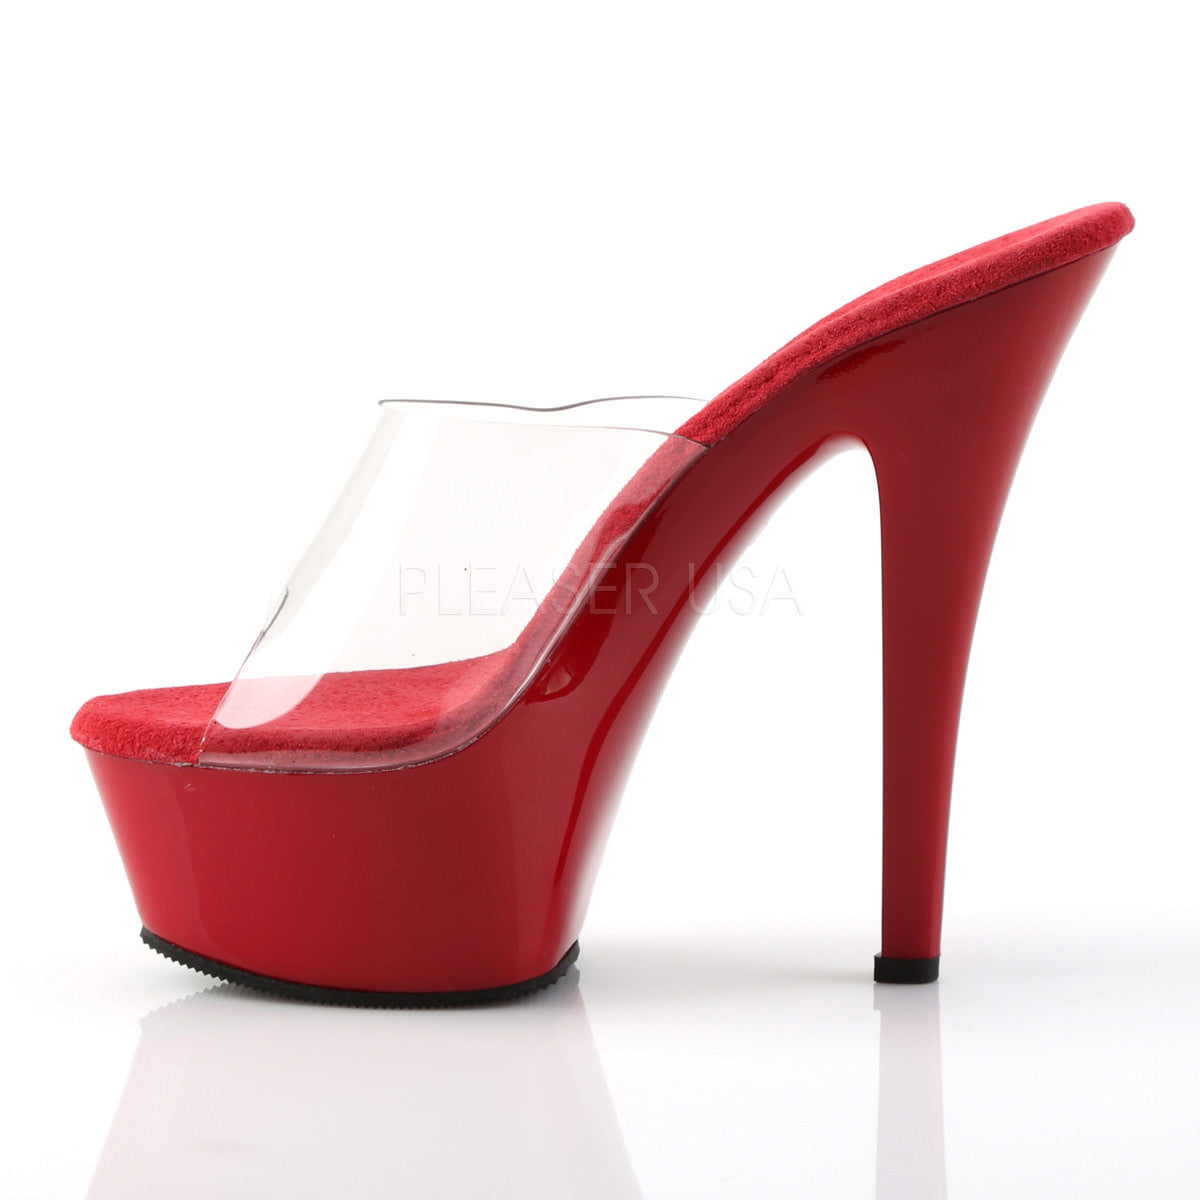 6 Inch Heel KISS-201 Clear-Red